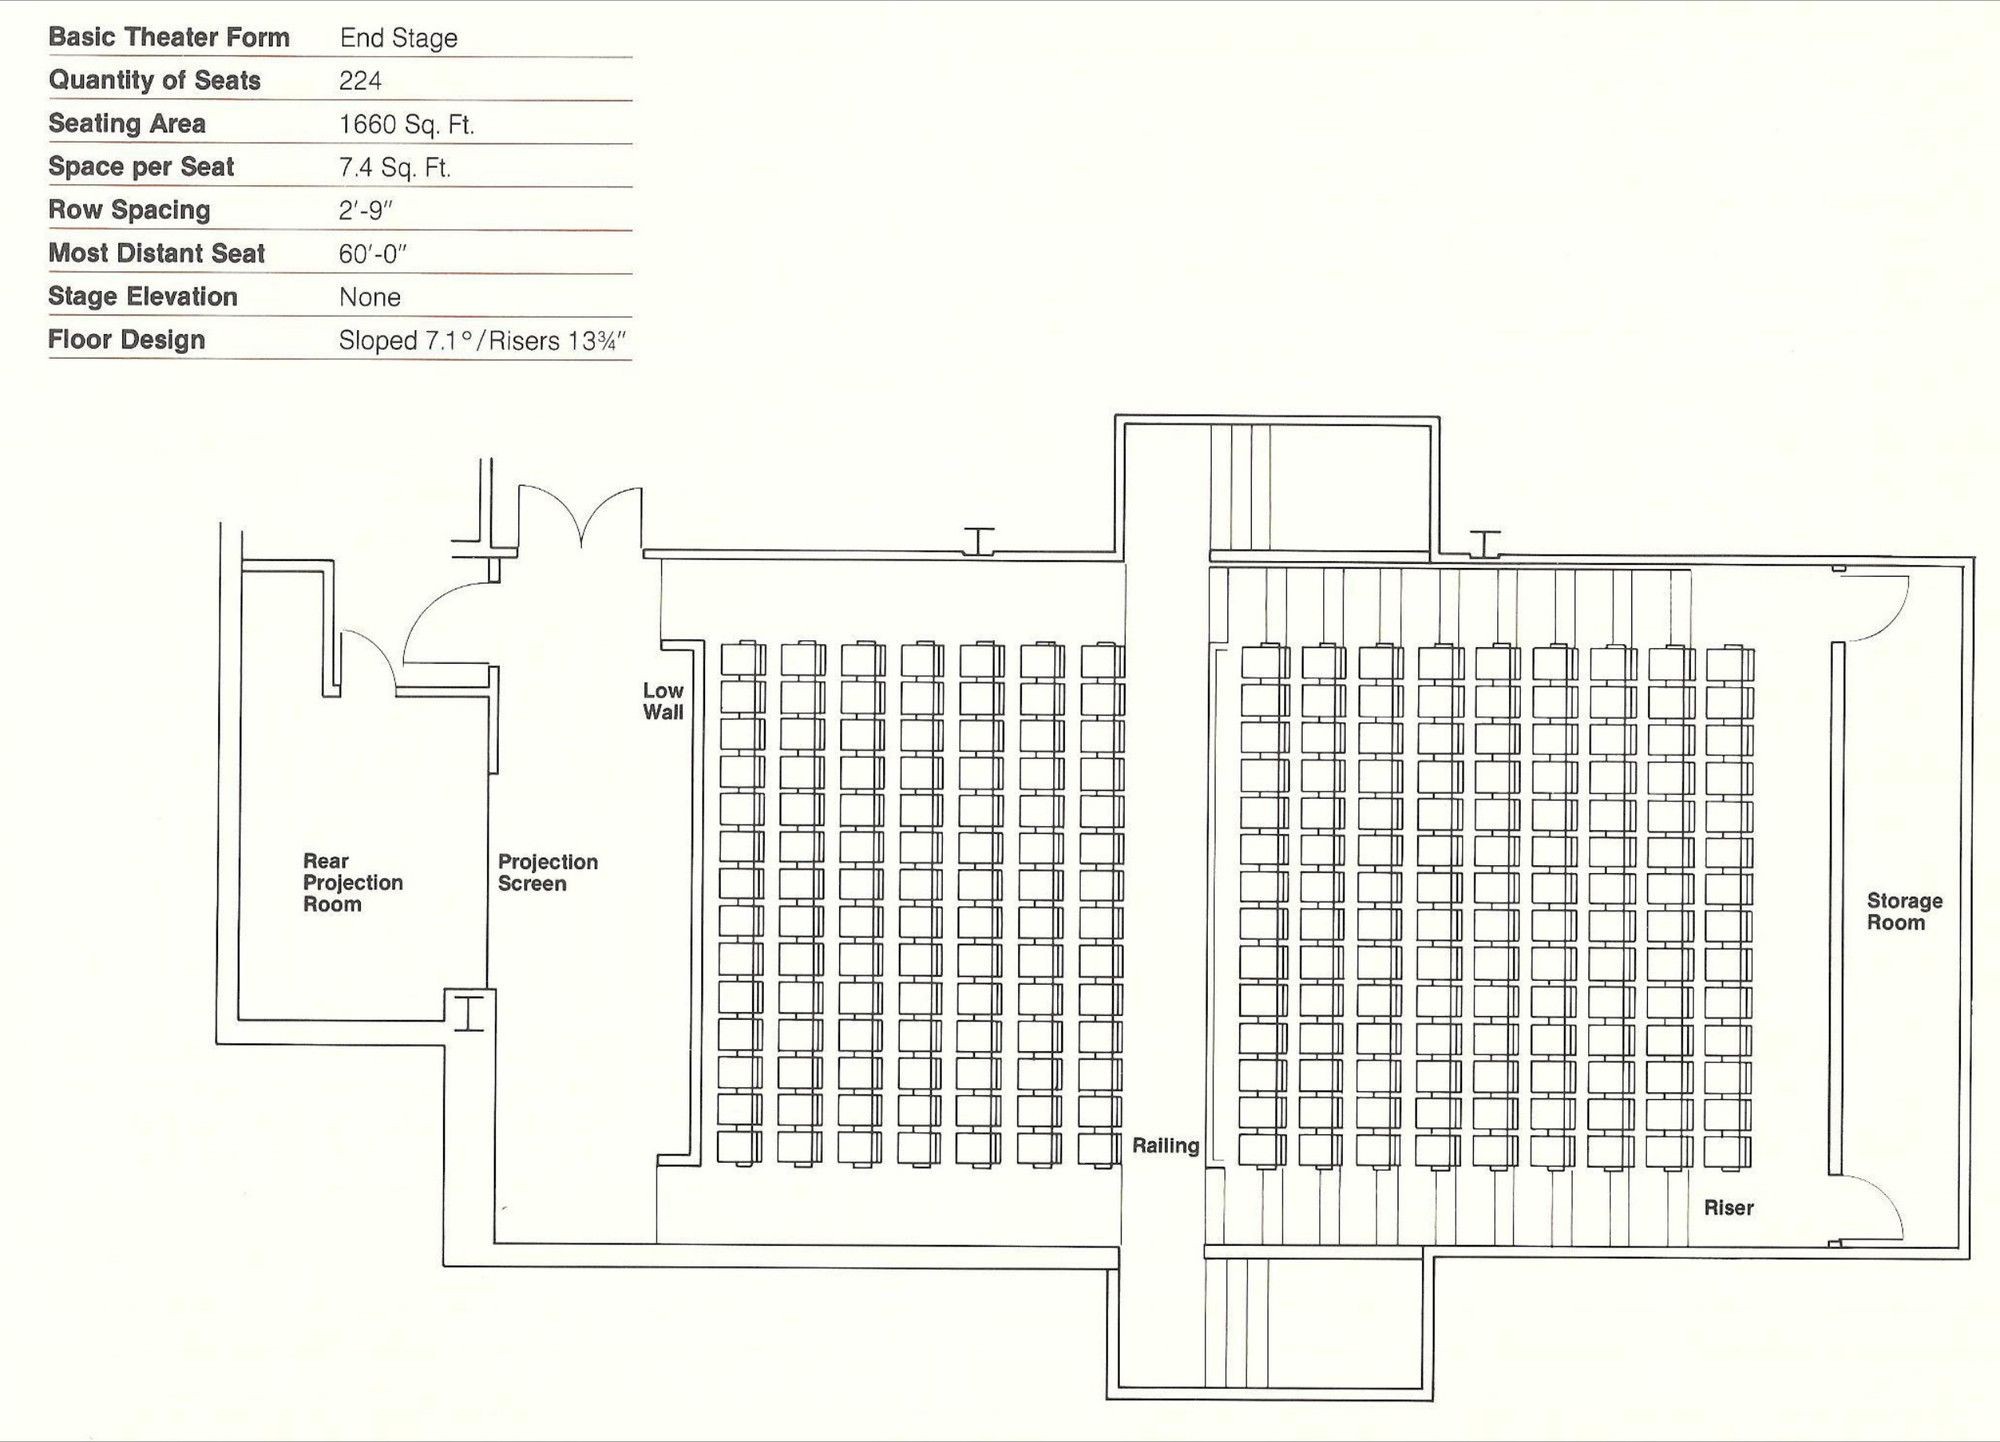 Image 11 of 32 from gallery of How to Design Theater Seating Shown Through 21 Detailed Example Layouts Courtesy of Theatre Solutions Inc